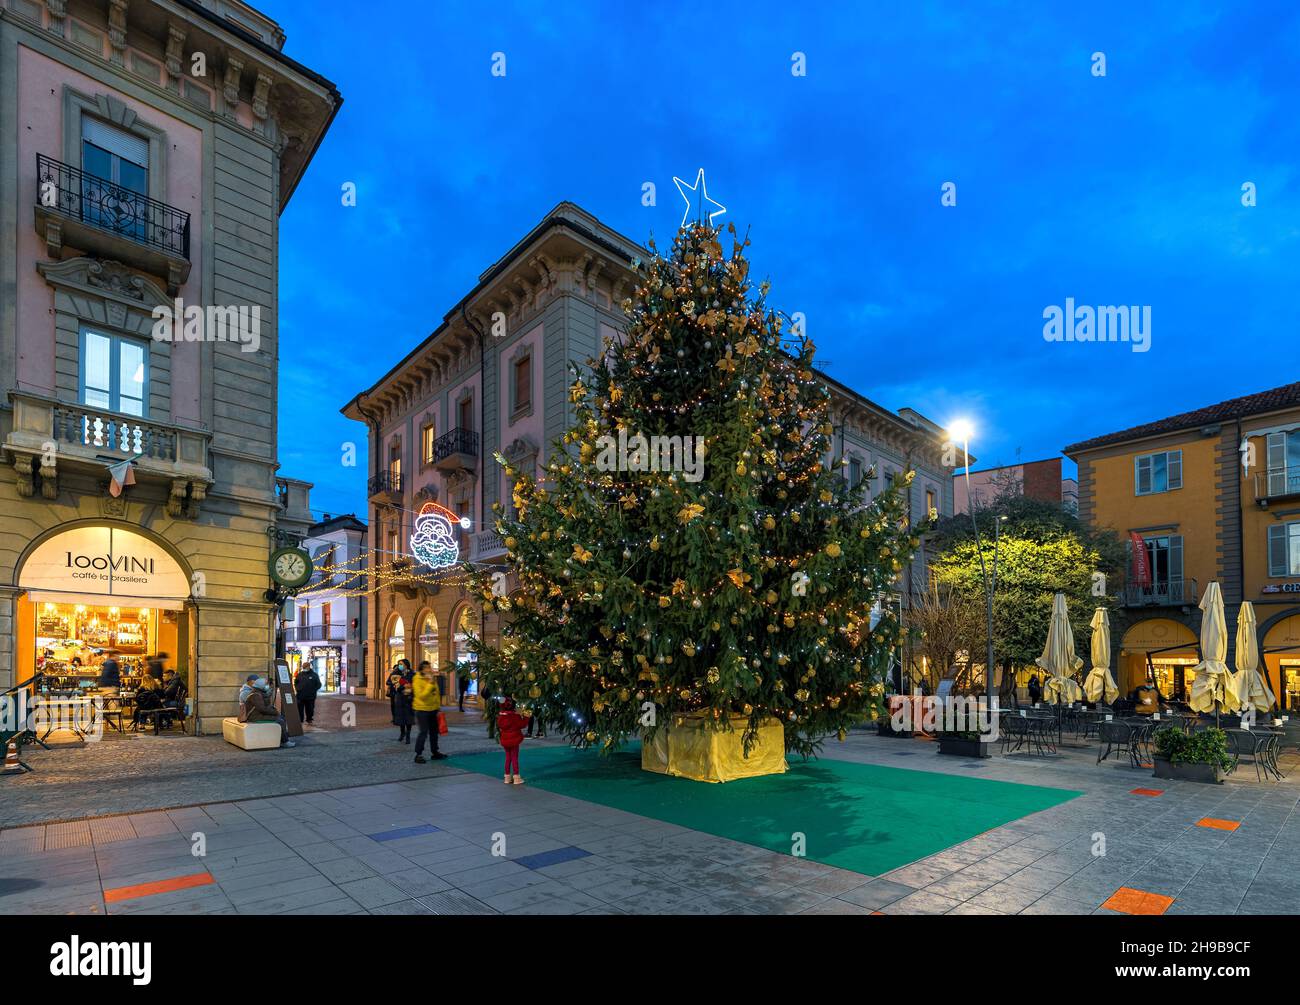 Big Christmas tree on town square in the evening in Alba, Piedmont, Northern Italy. Stock Photo